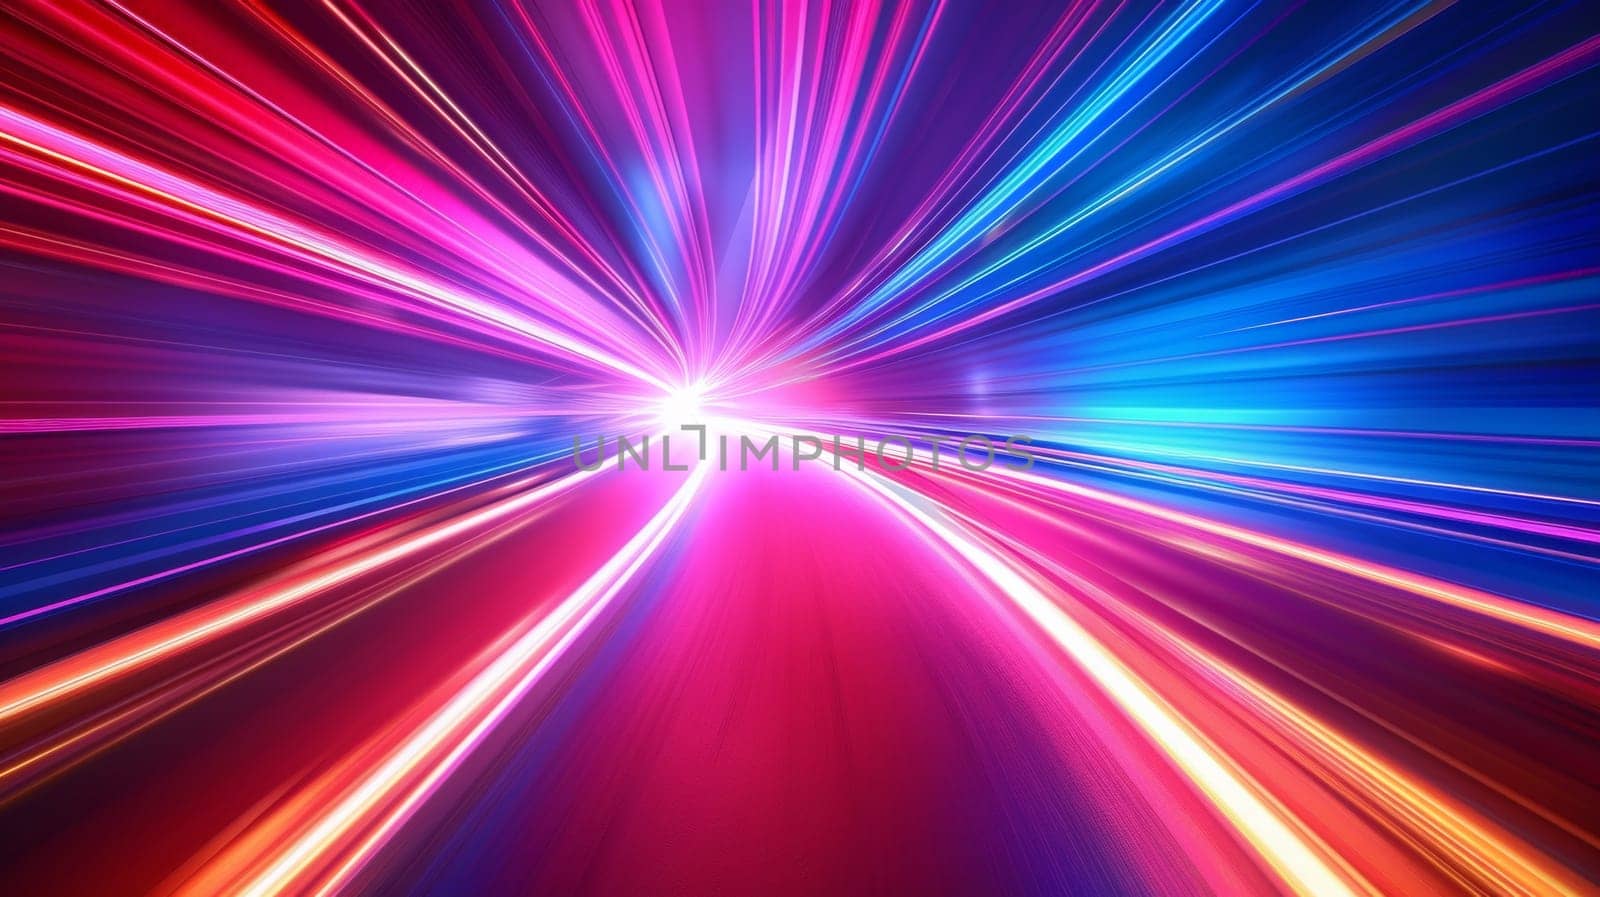 A colorful abstract background with a bright light trail